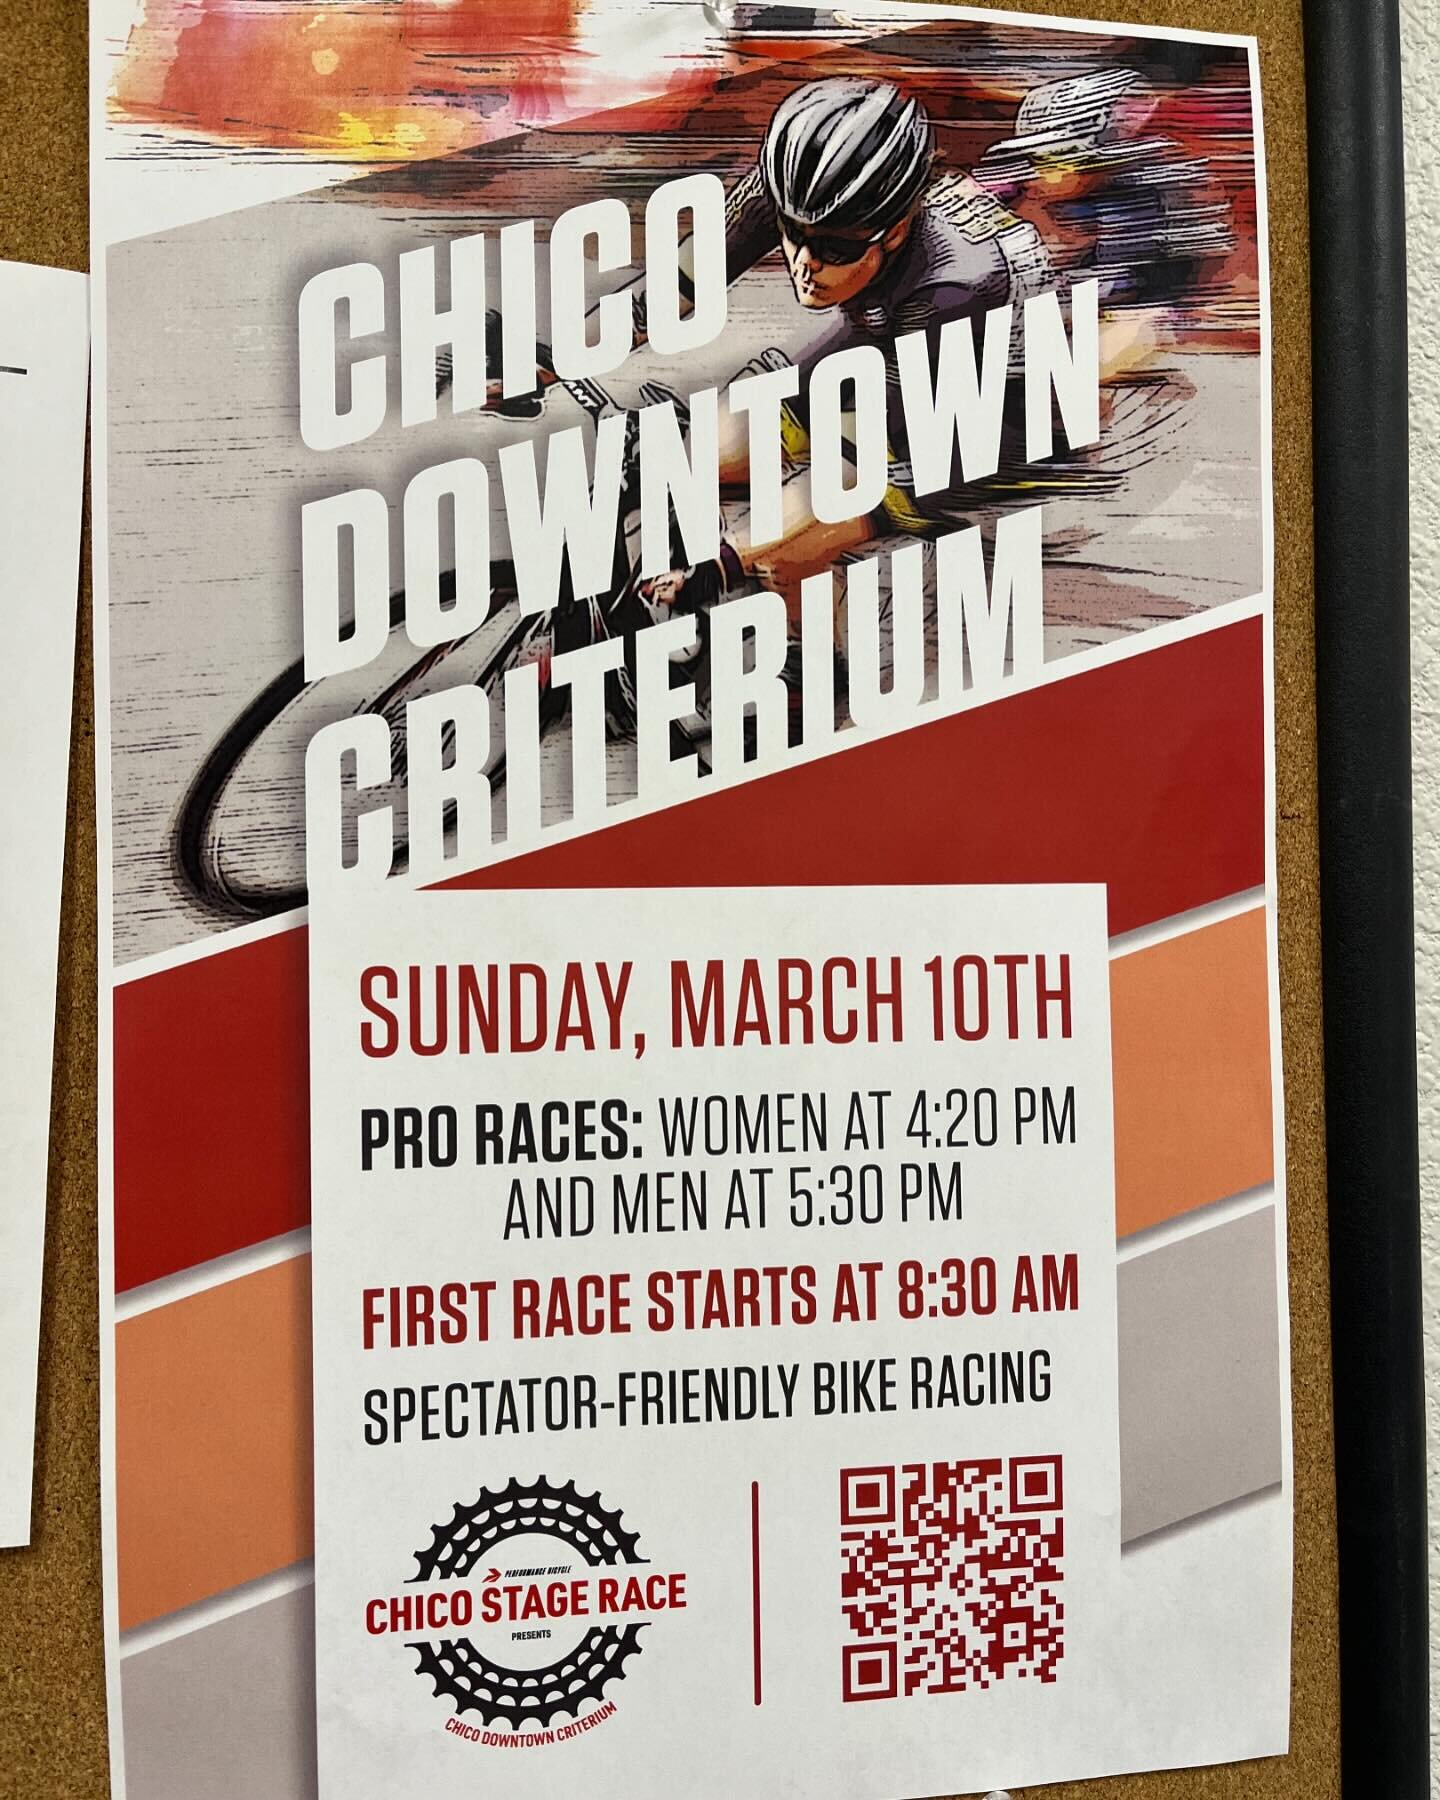 Less than a week to go to the Chico Crit! Get reg&rsquo;ed asap for the race this Sunday, March 10!